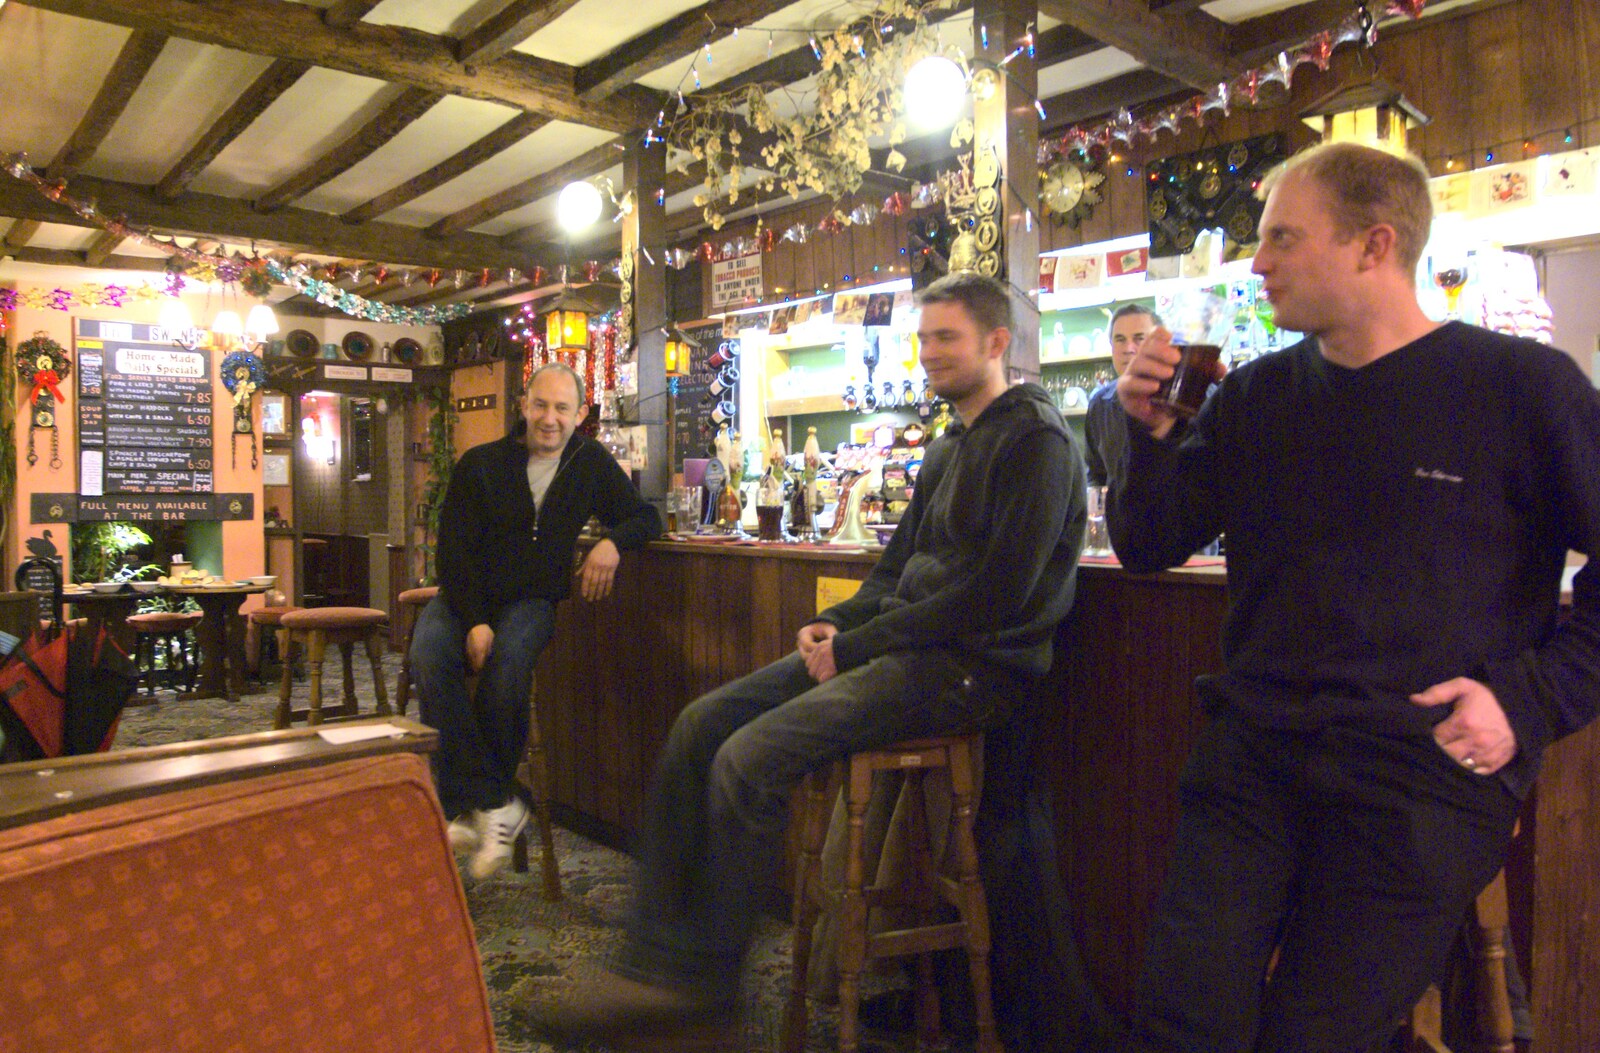 New Year's Eve at the Swan Inn, and Moonlight Photos, Brome, Suffolk - 31st December 2009: DH, Phil and Paul at the bar